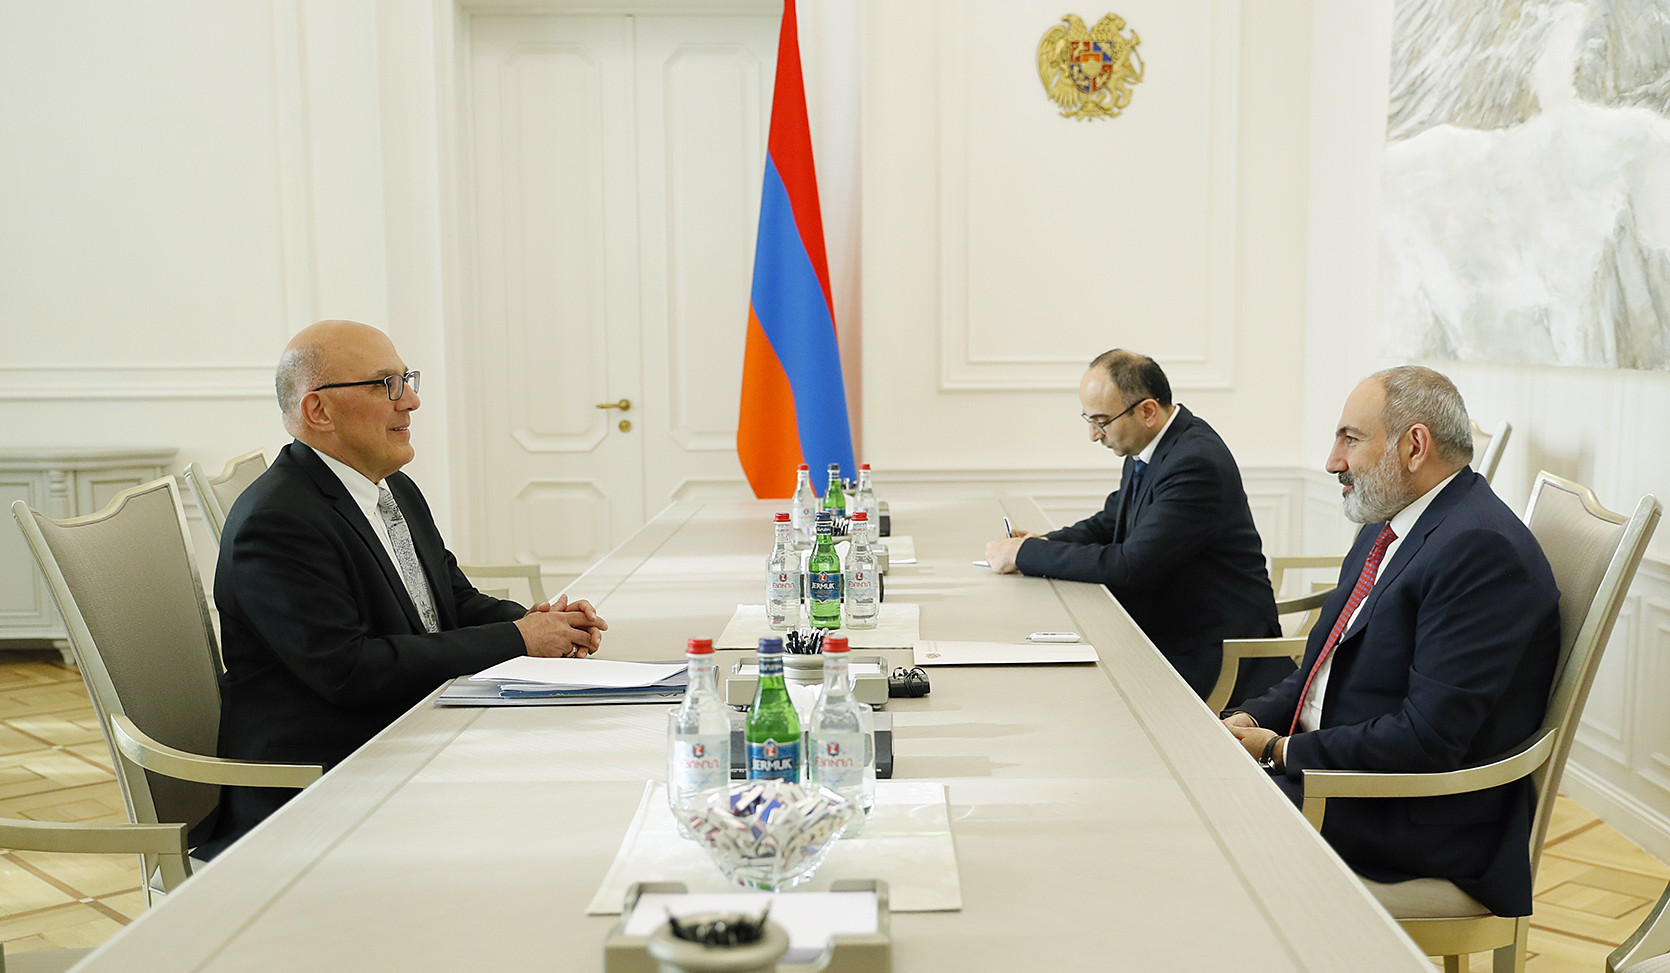 Prime Minister receives the President of the American University of Armenia